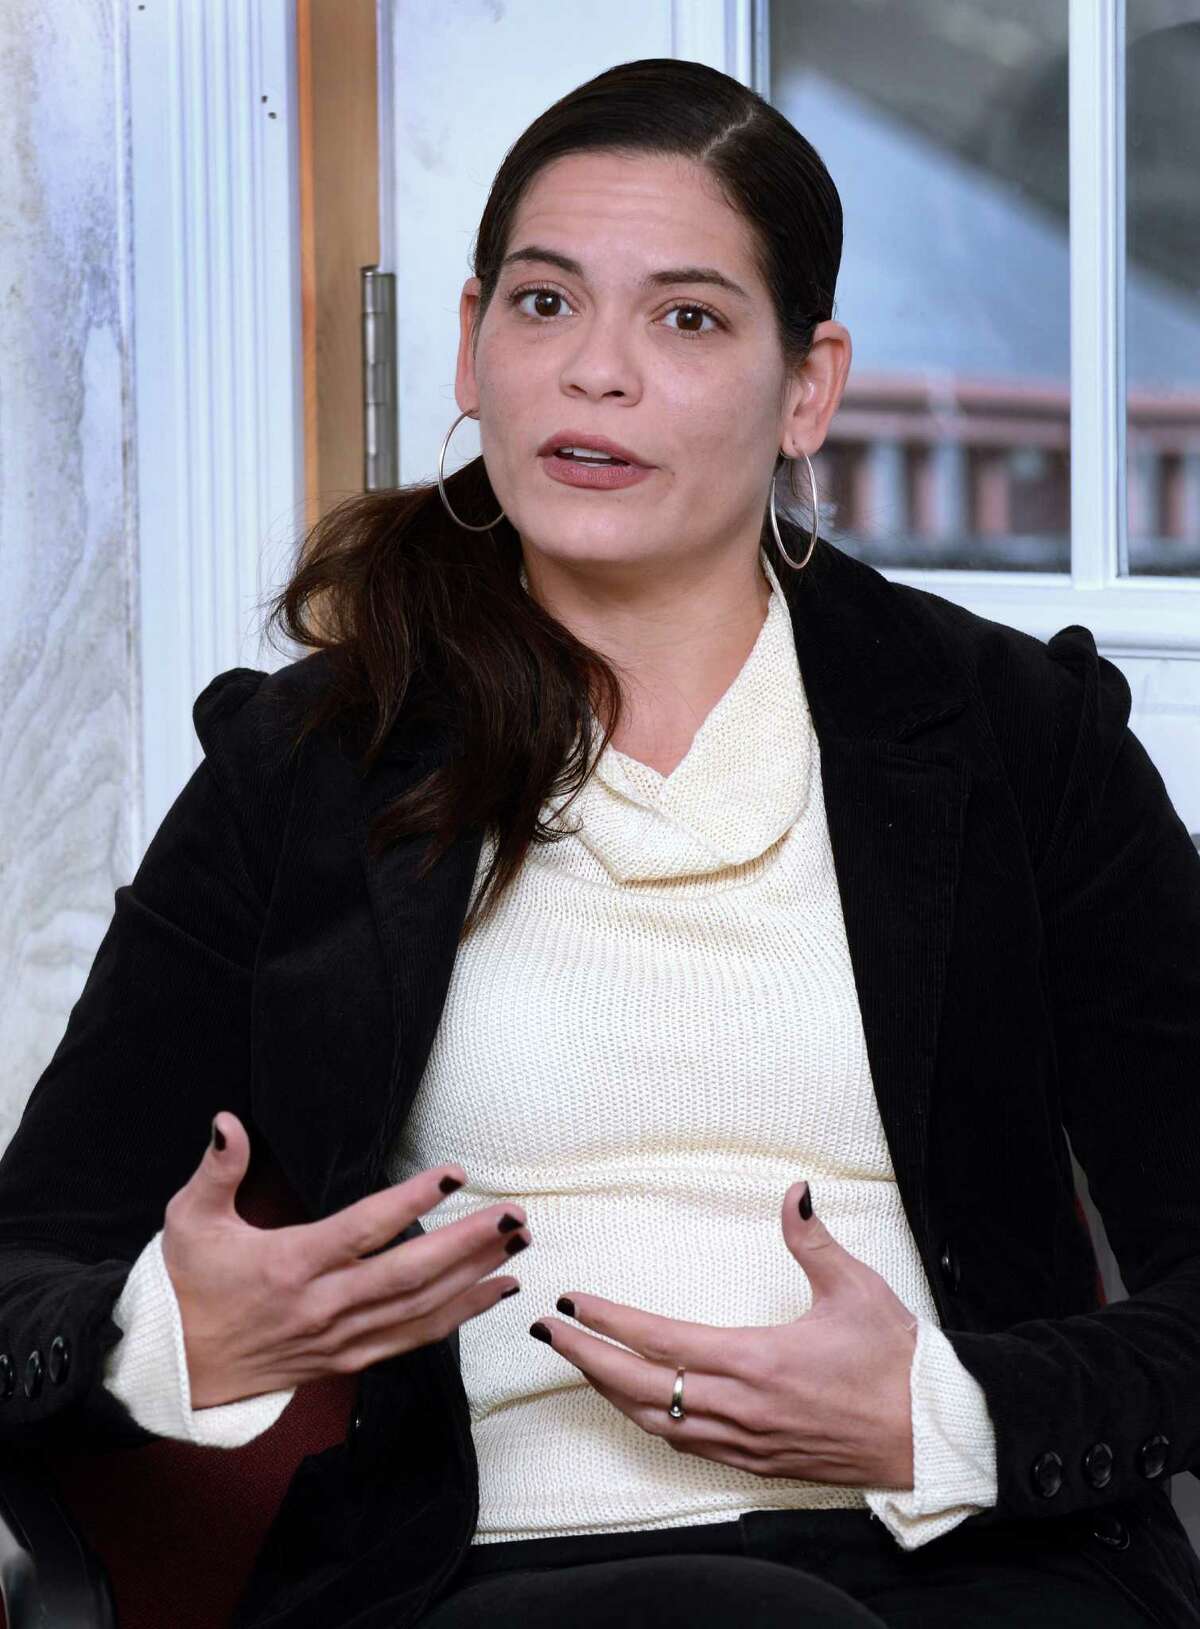 Ingrid Alvarez-DiMarzo, state director of the Hispanic Federation, joined other advocates on Wednesday in supporting legislation that would end the practice of including prison populations as residents of those largely rural and suburban districts, taking away political power from the large cities where most lived before prison.